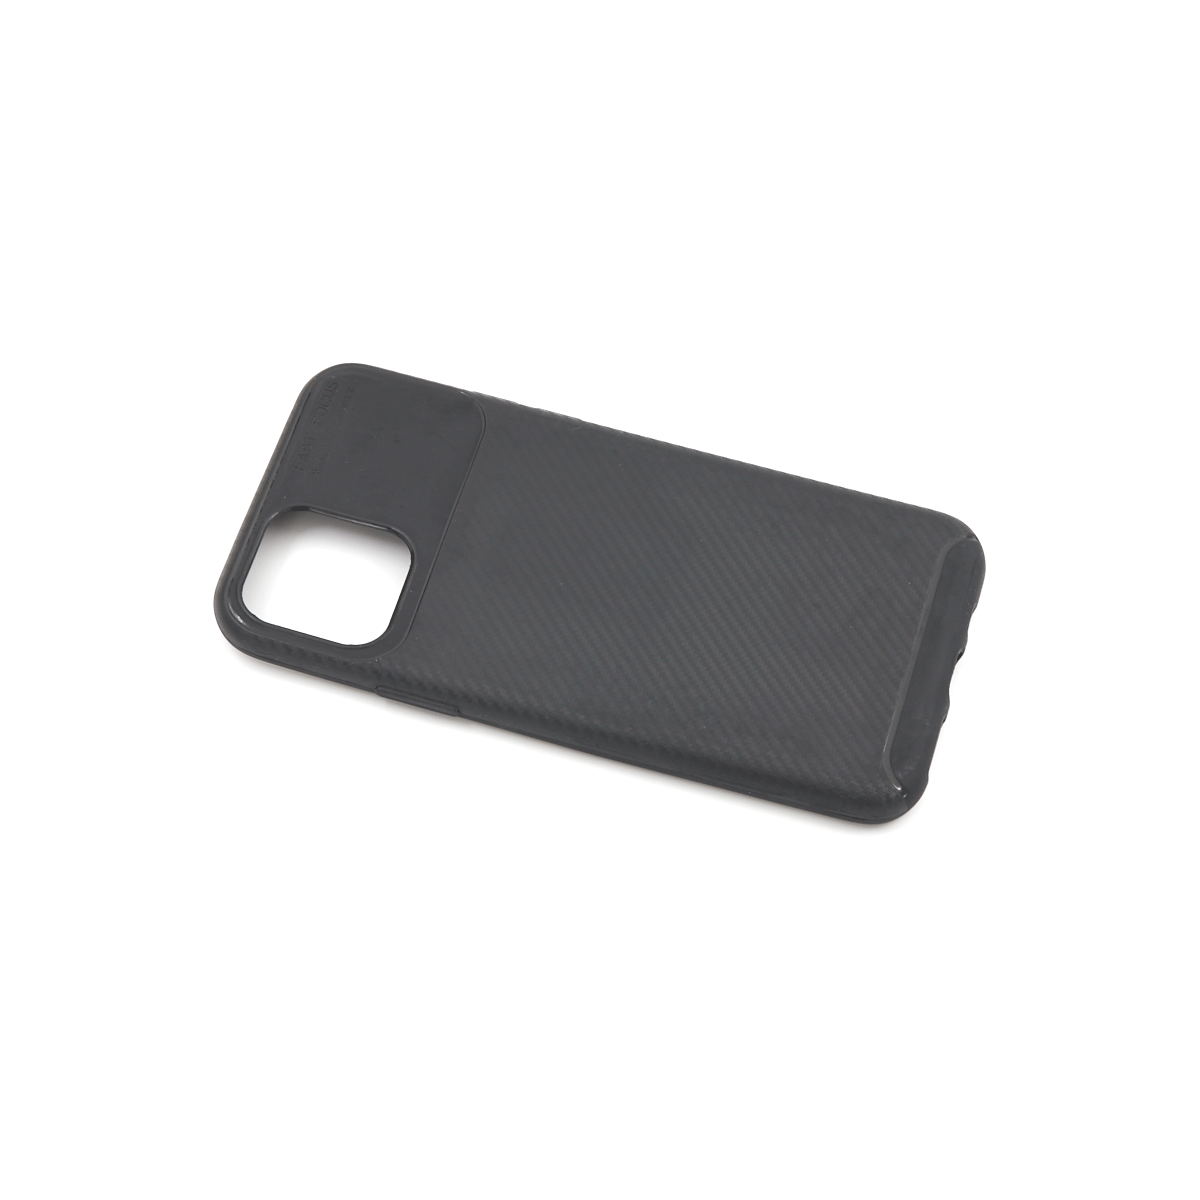 Tpu carbon for iphone 11 pro 5.8" (black)